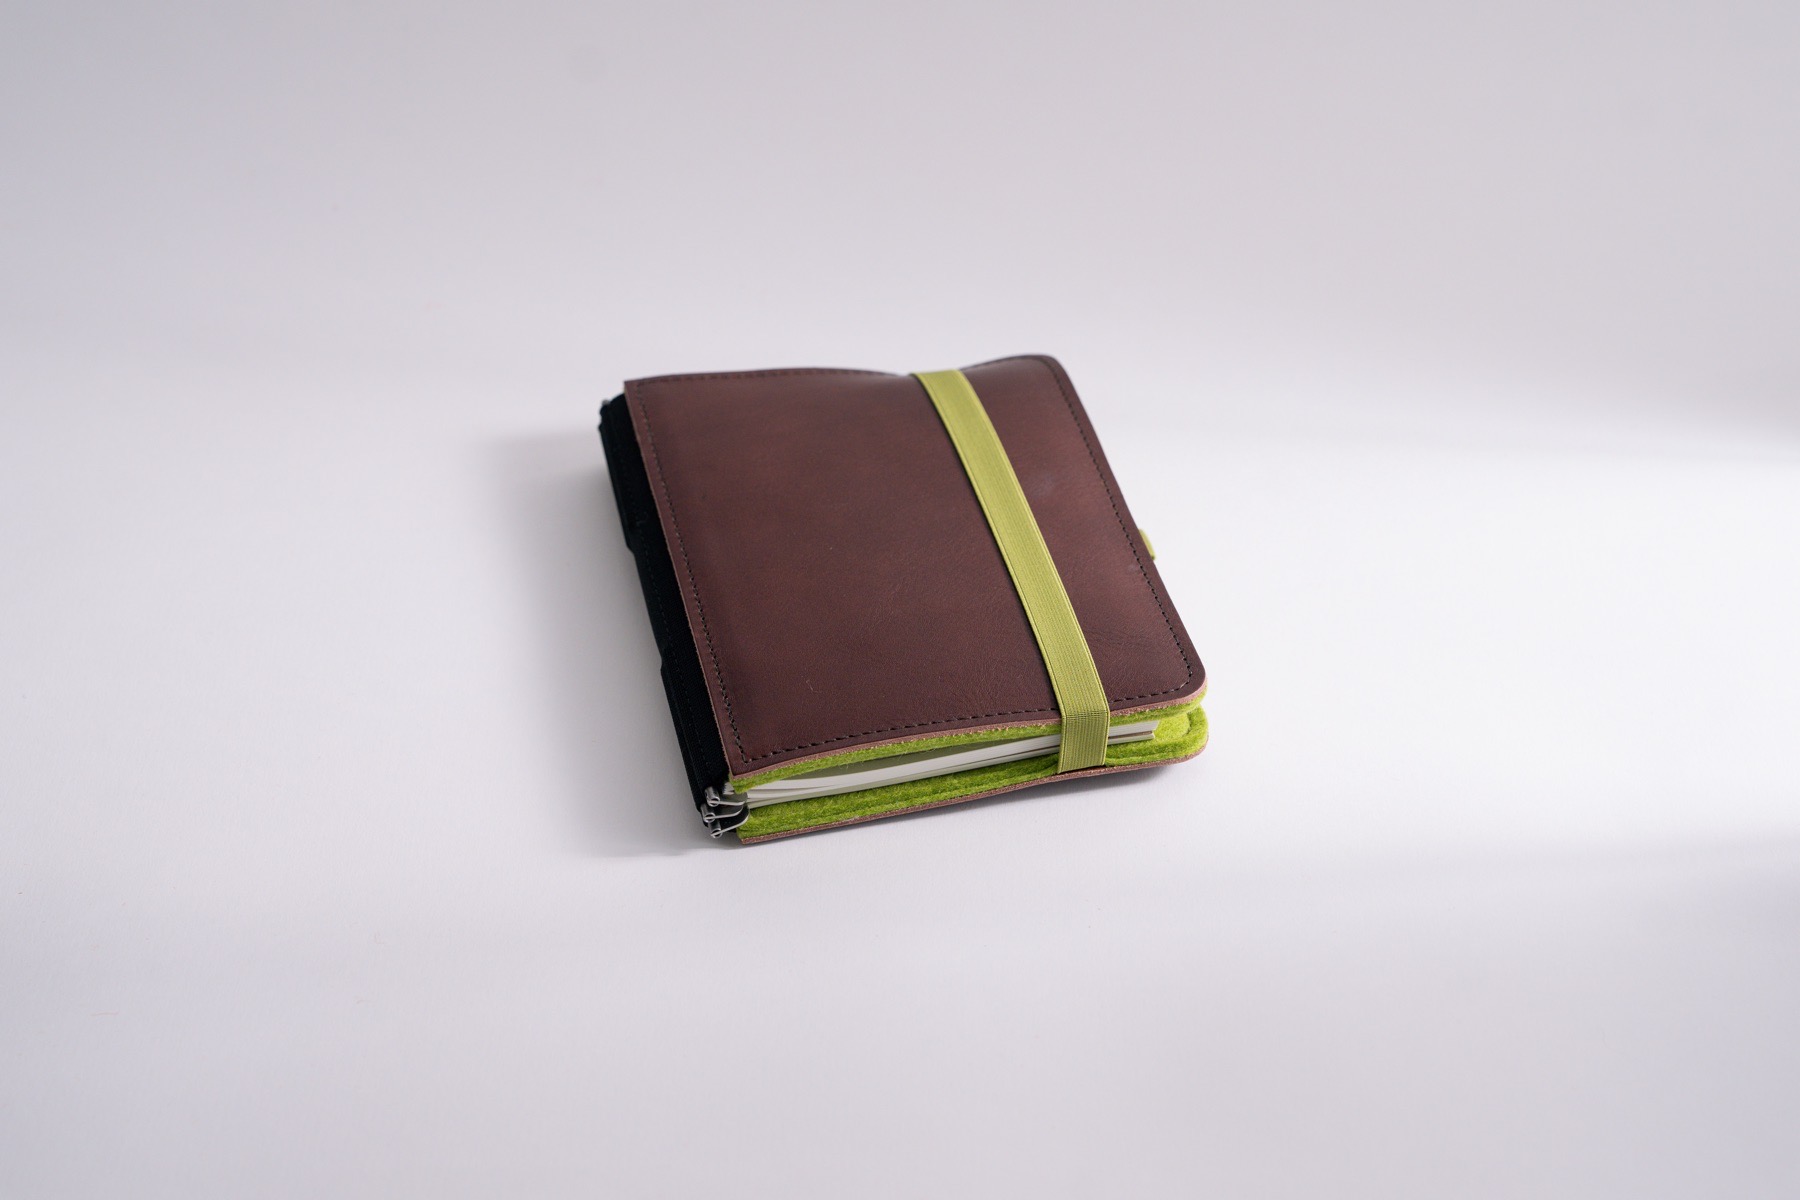 Roterfaden organizer LTD_030 in size M, with lime green felt inside and dark brown leather outside with elastic closure.